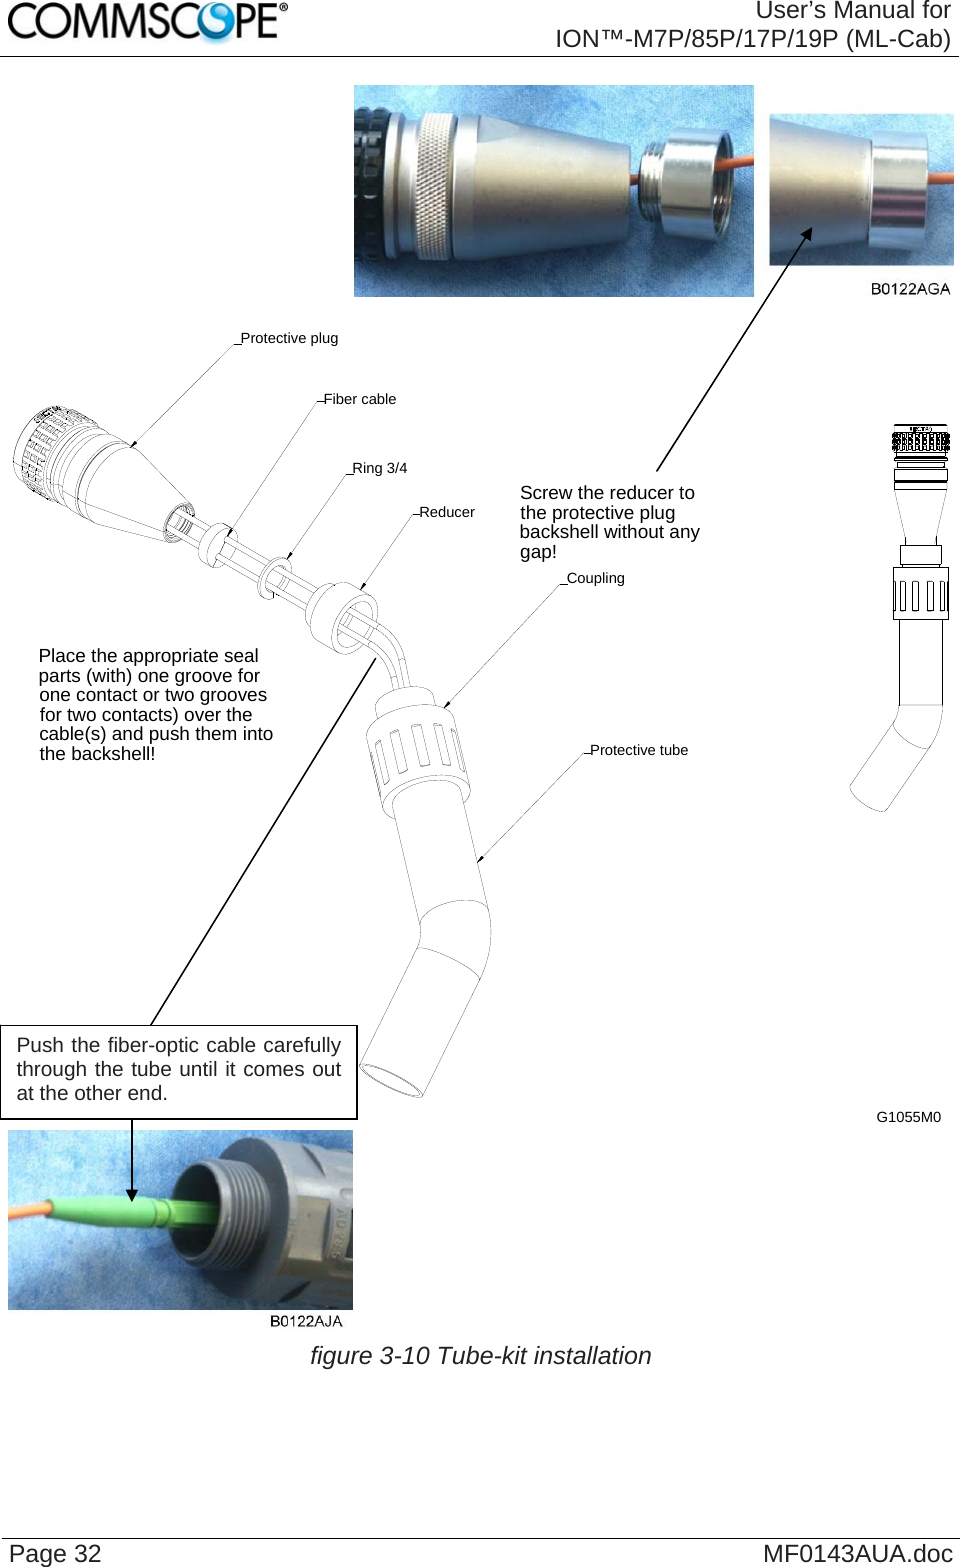  User’s Manual for ION™-M7P/85P/17P/19P (ML-Cab) Page 32  MF0143AUA.doc   Screw the reducer to the protective plug backshell without any gap!Place the appropriate seal parts (with) one groove for one contact or two grooves for two contacts) over the cable(s) and push them into the backshell! Protective tubeReducerCouplingProtective plugFiber cableRing 3/4G1055M0   figure 3-10 Tube-kit installation   Push the fiber-optic cable carefully through the tube until it comes out at the other end. 